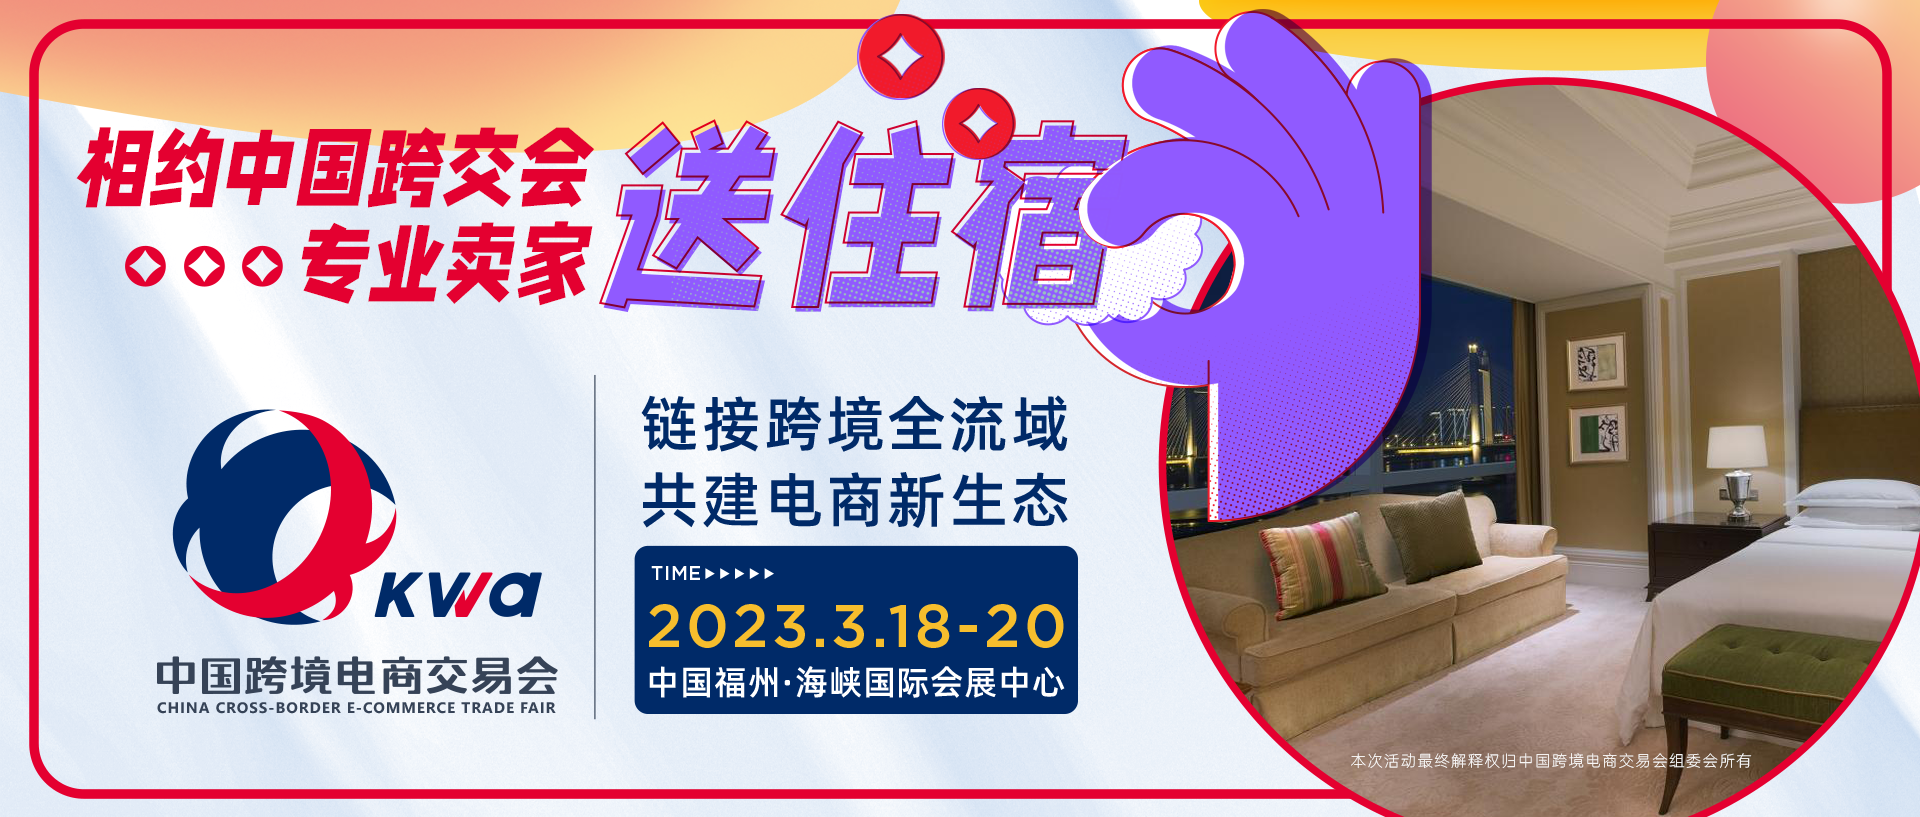 Meet at the China International Trade Fair, and professional sellers will provide you with accommodation